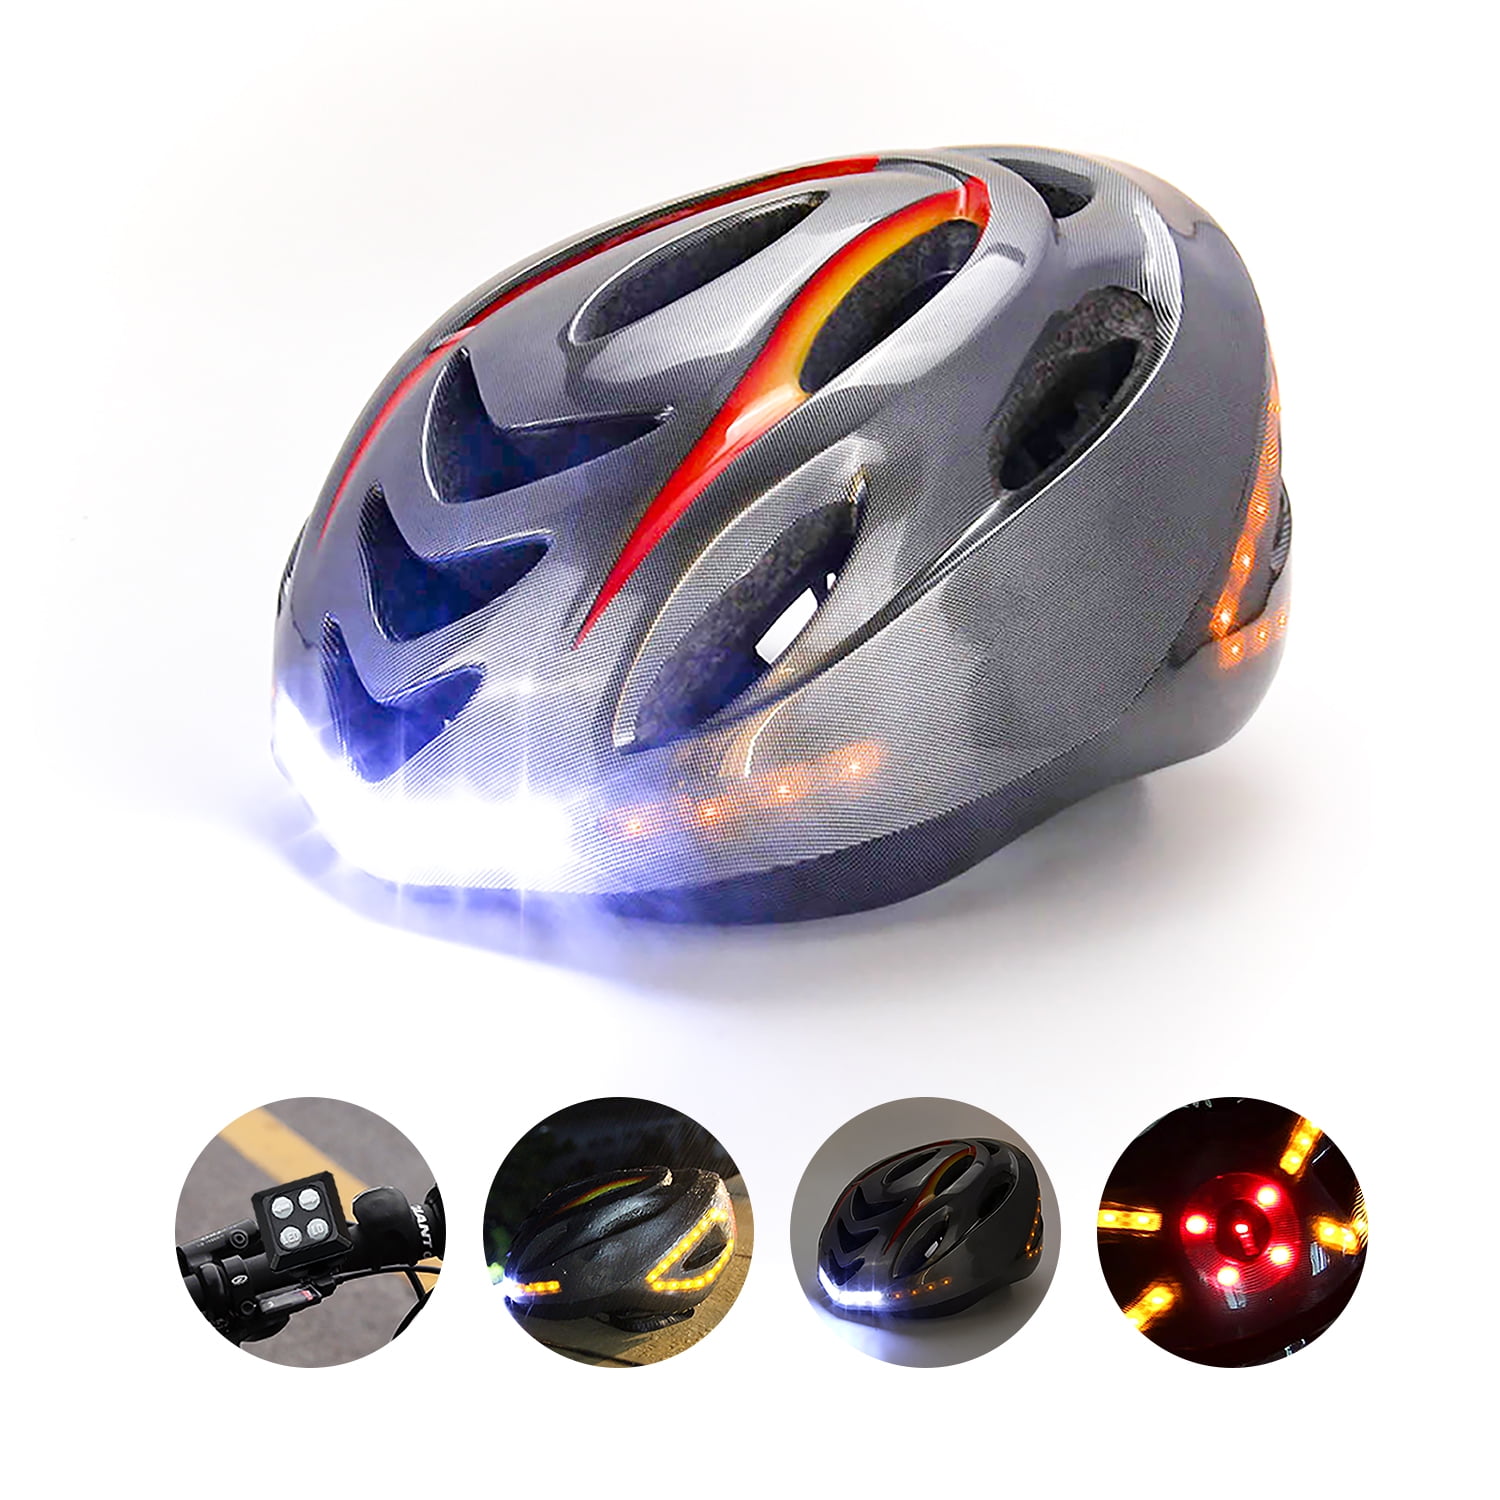 Fit for Mountain Road Cycling Lightweight Bicycle Helmet with Rear Led Wireless Rechargeable Safety Light for Adult Detachable Visor Adjustable Rotary Knob 